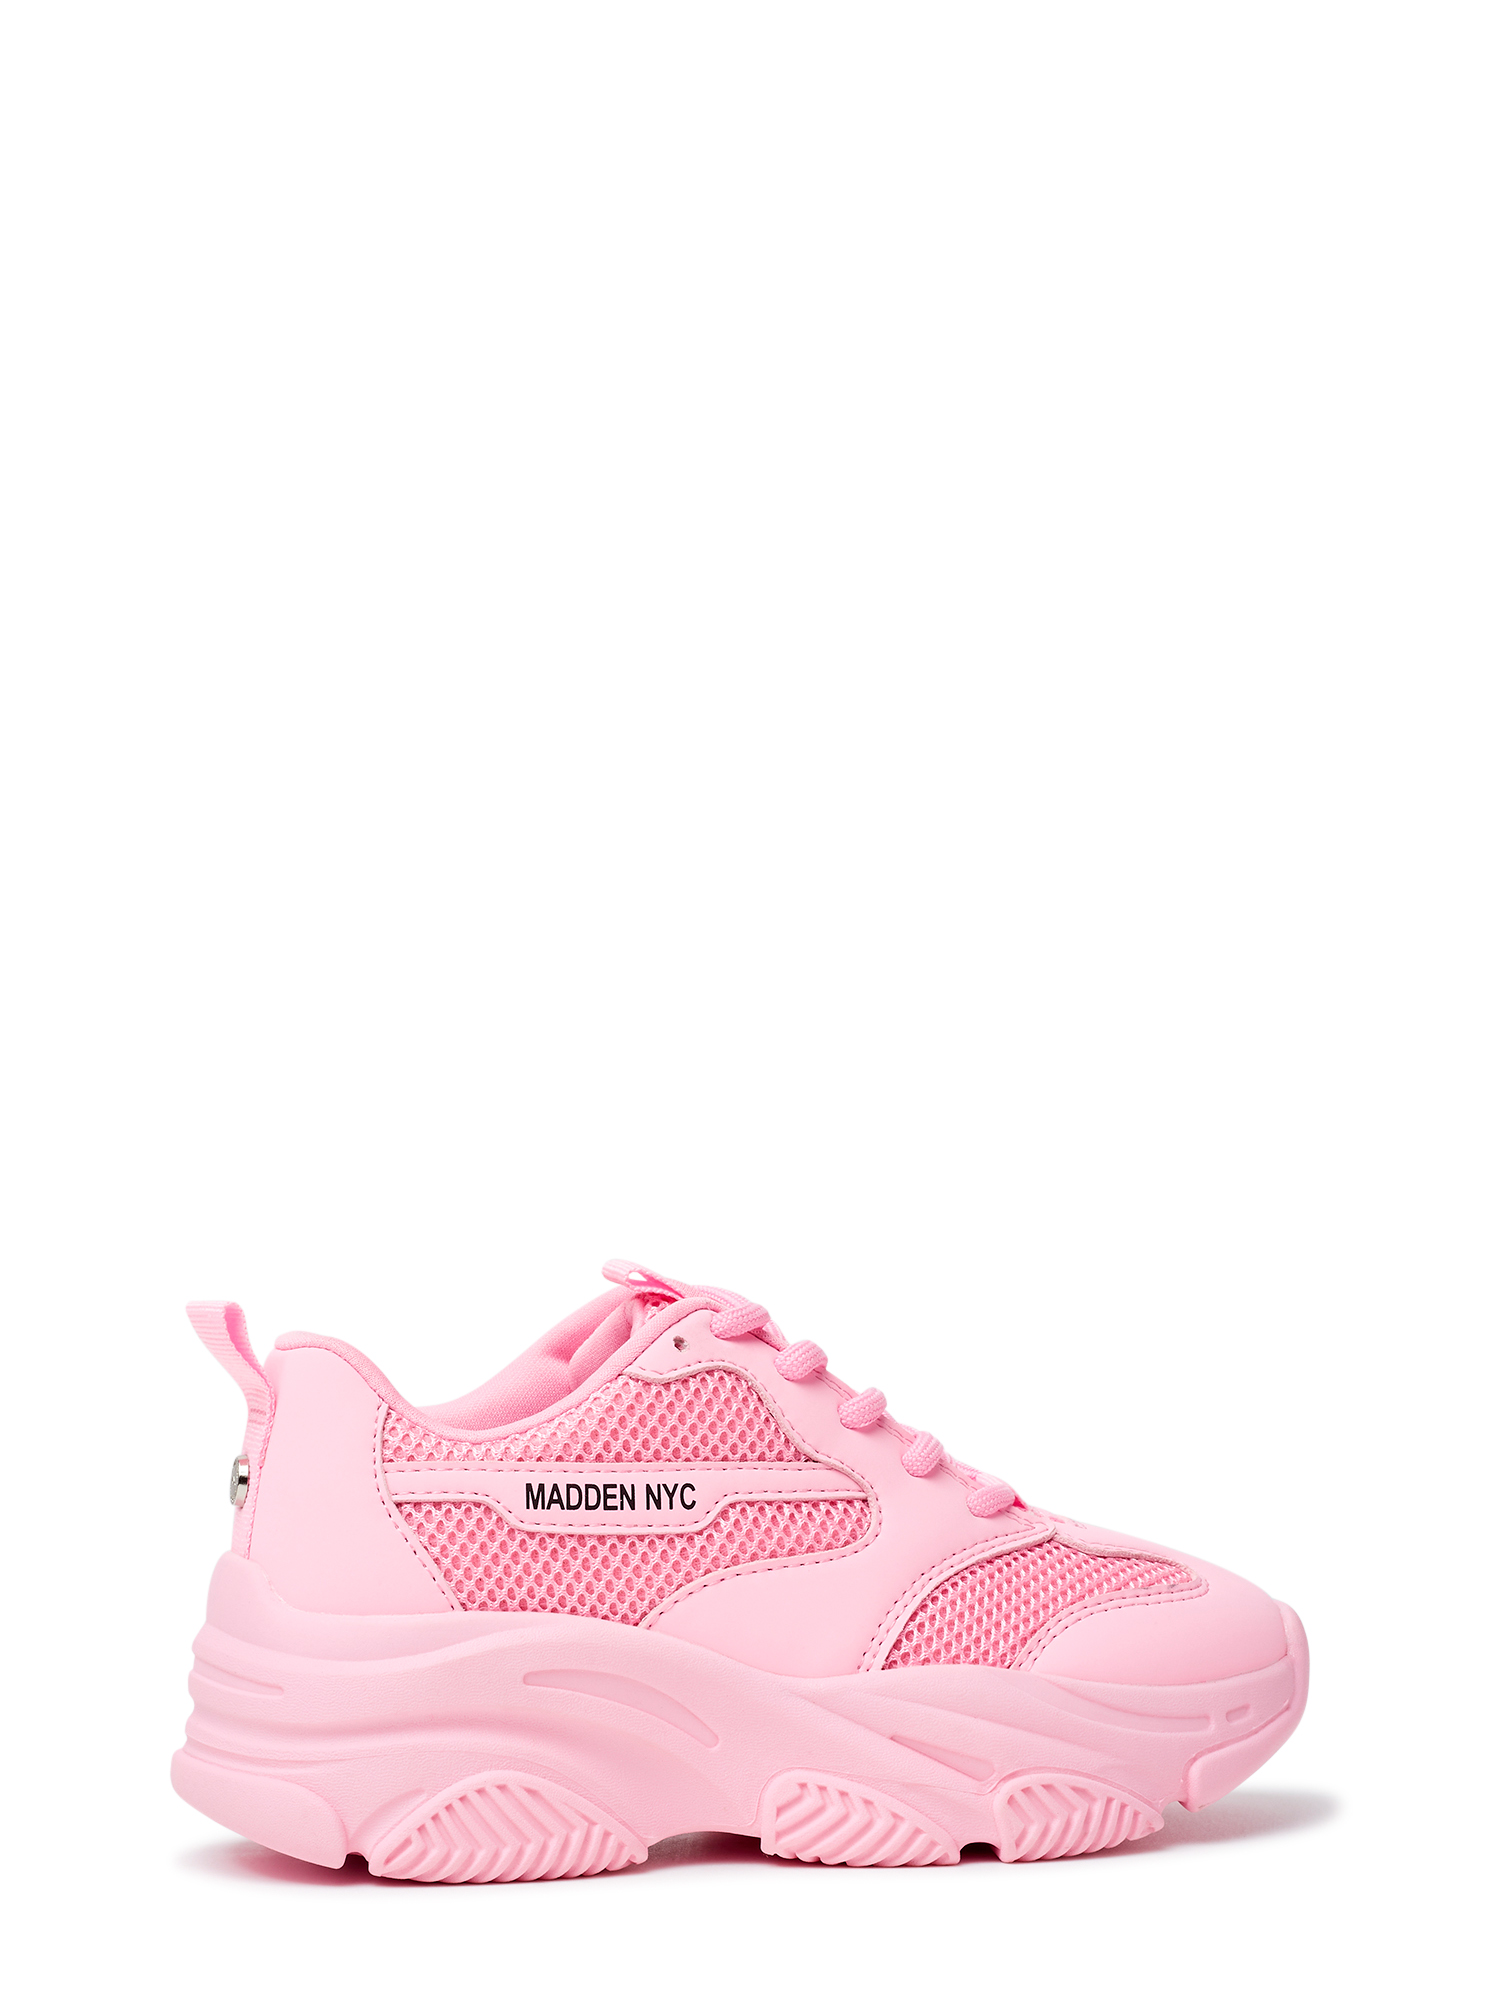 Madden NYC Little Girl & Big Girl Dad Sneaker, Sizes 13-5 